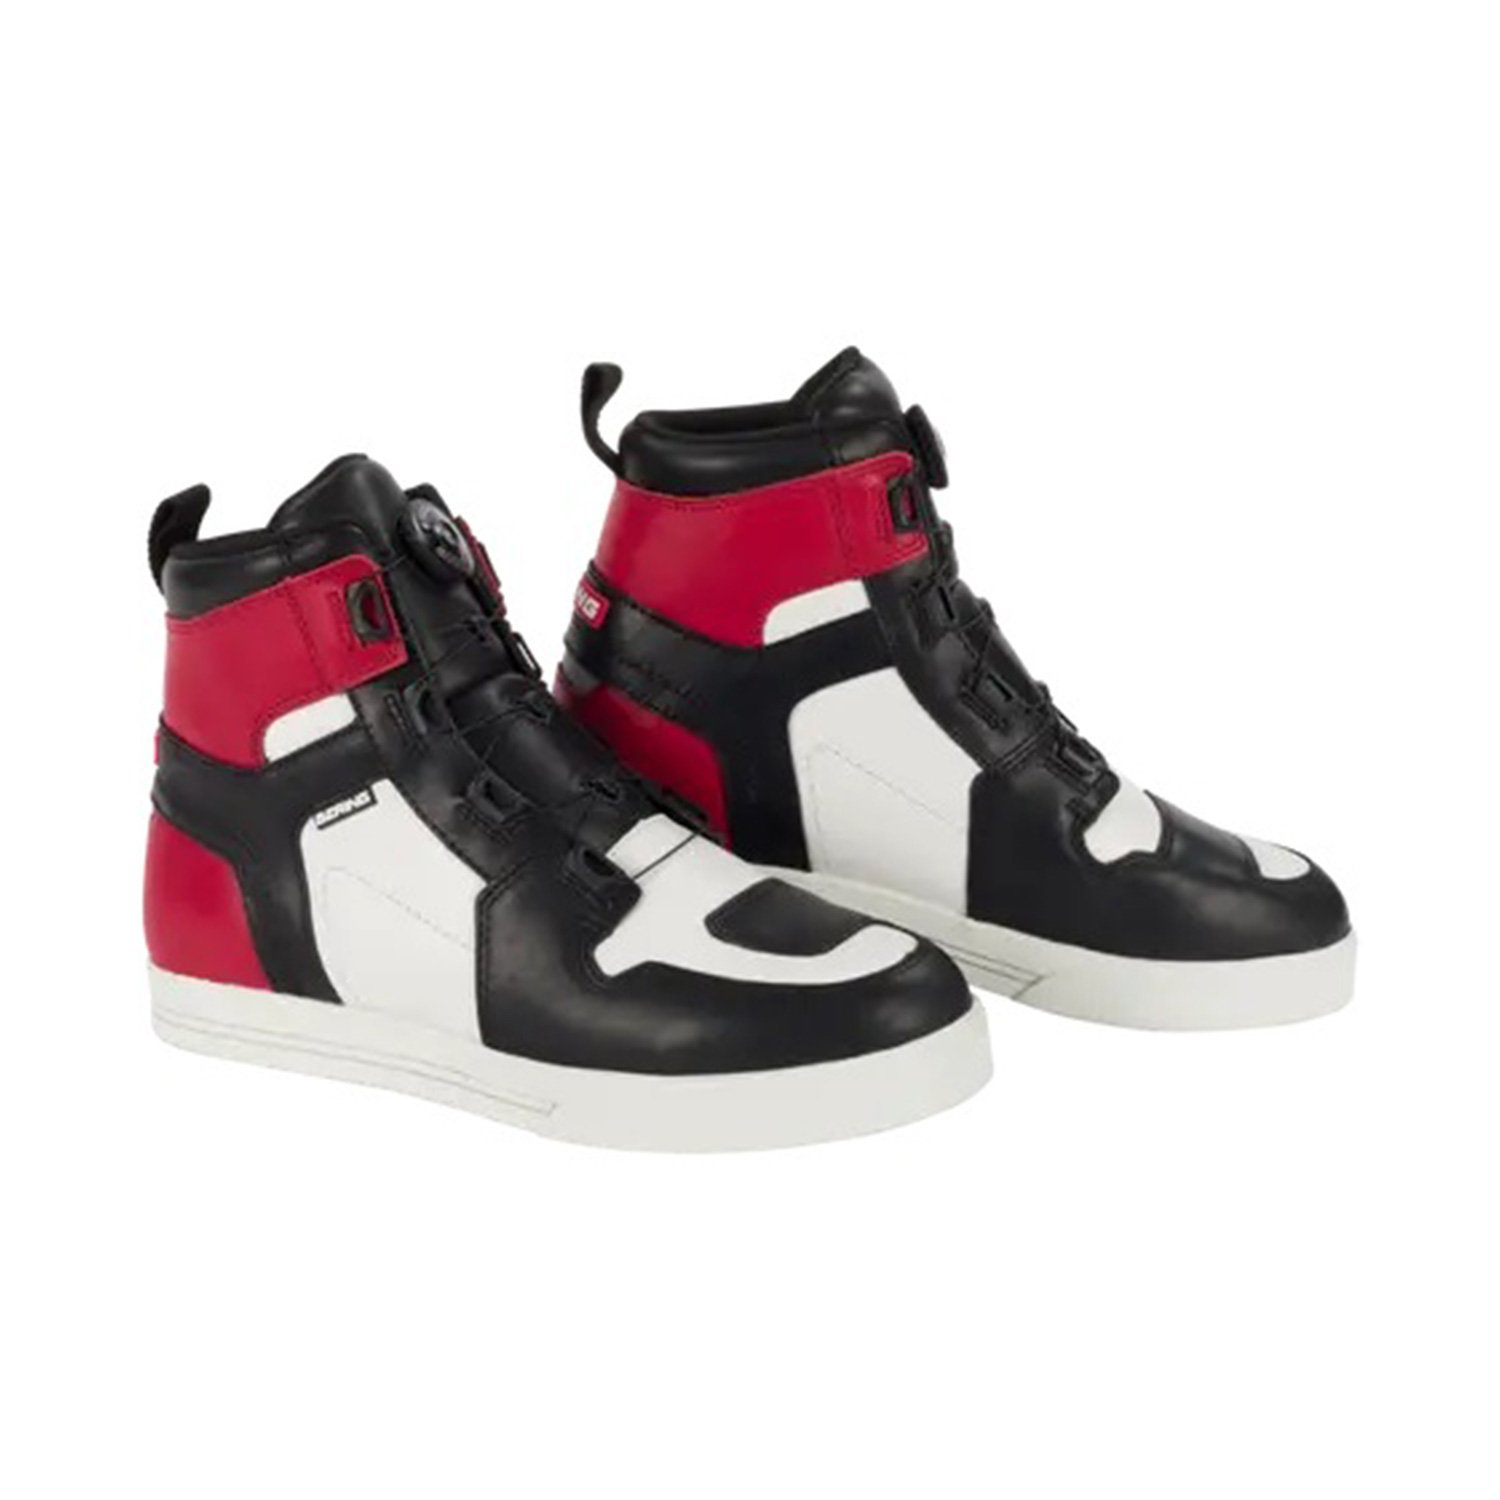 Image of Bering Sneakers Reflex A-Top Black White Red Size 40 EN